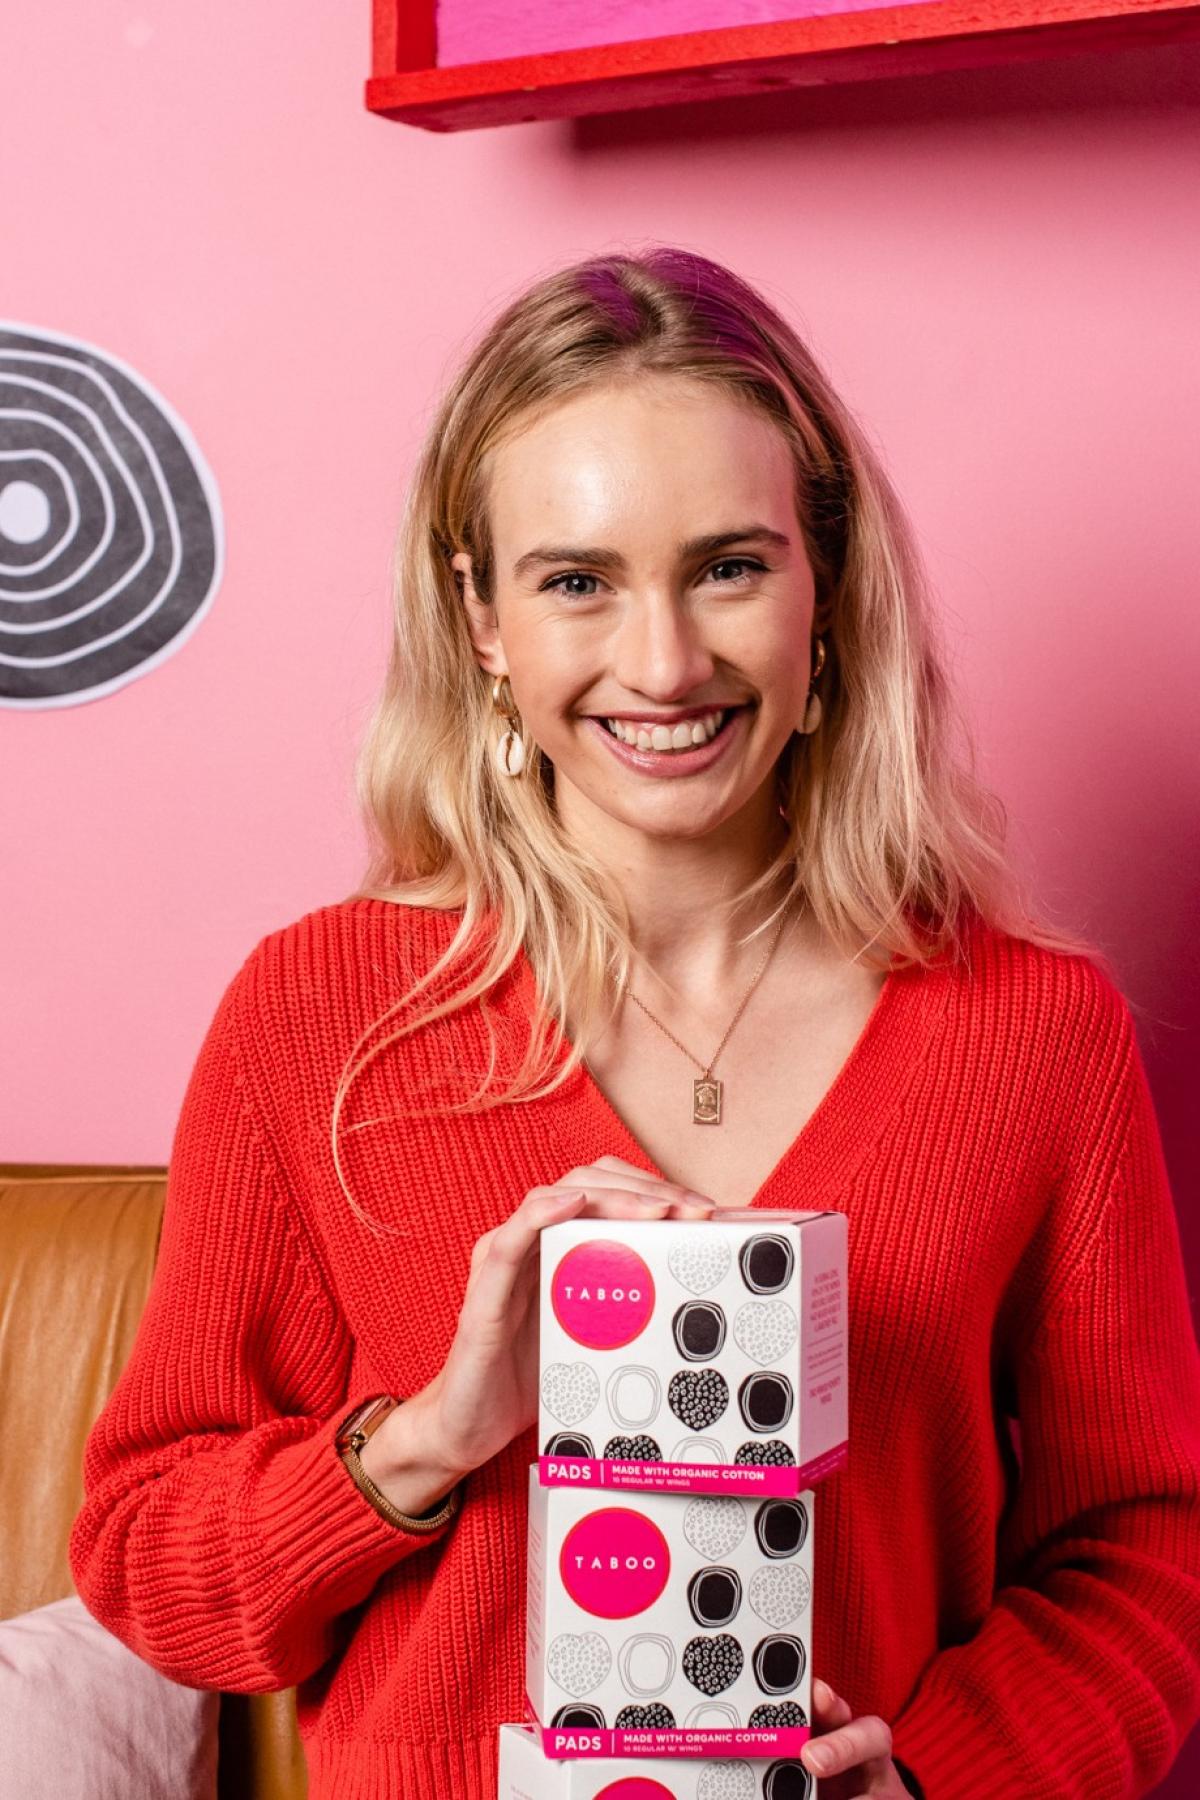 Isobel Marshall holding Taboo product boxes